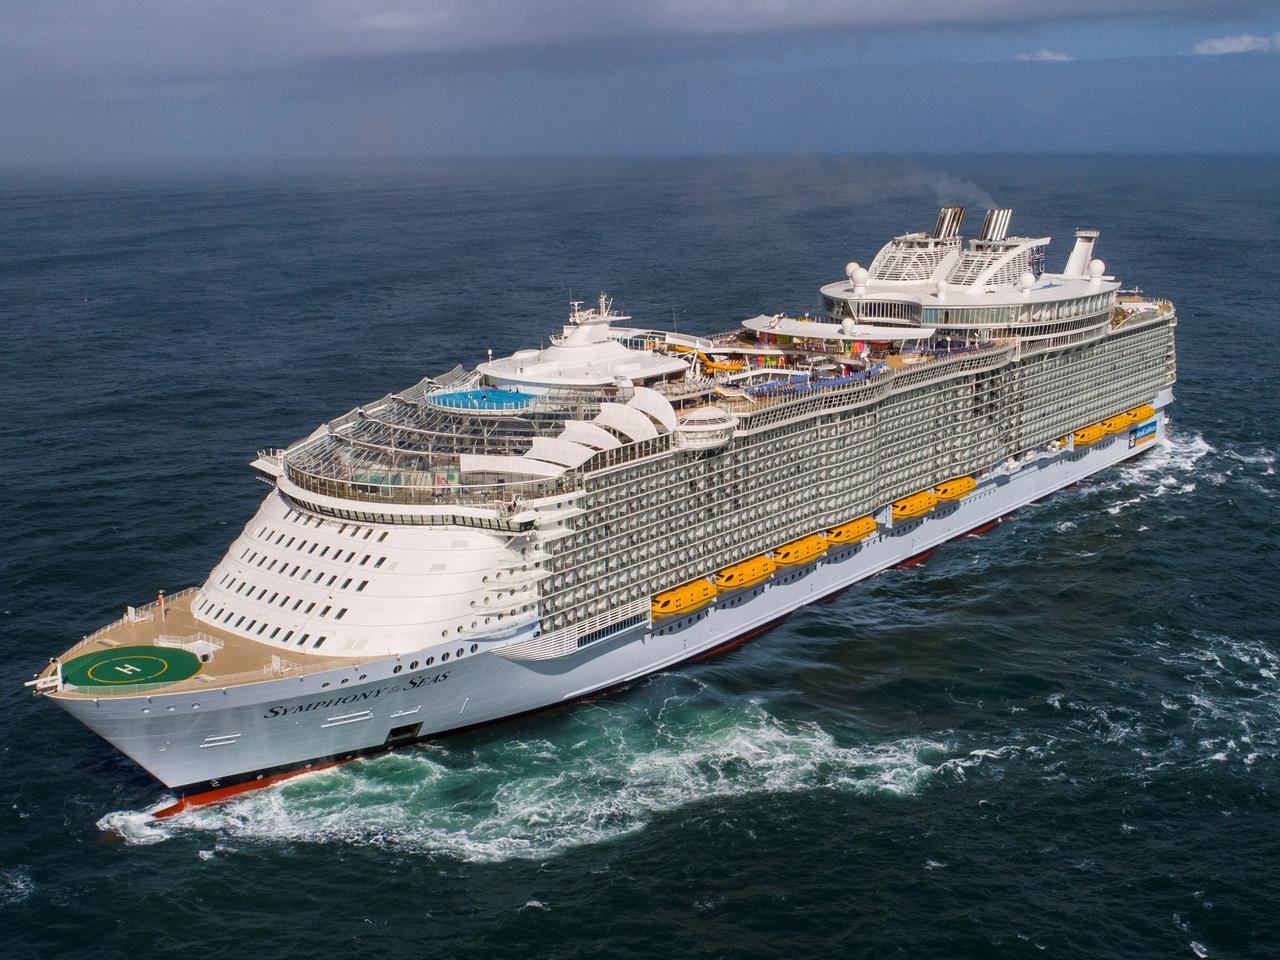 In pictures: The world's biggest cruise ship